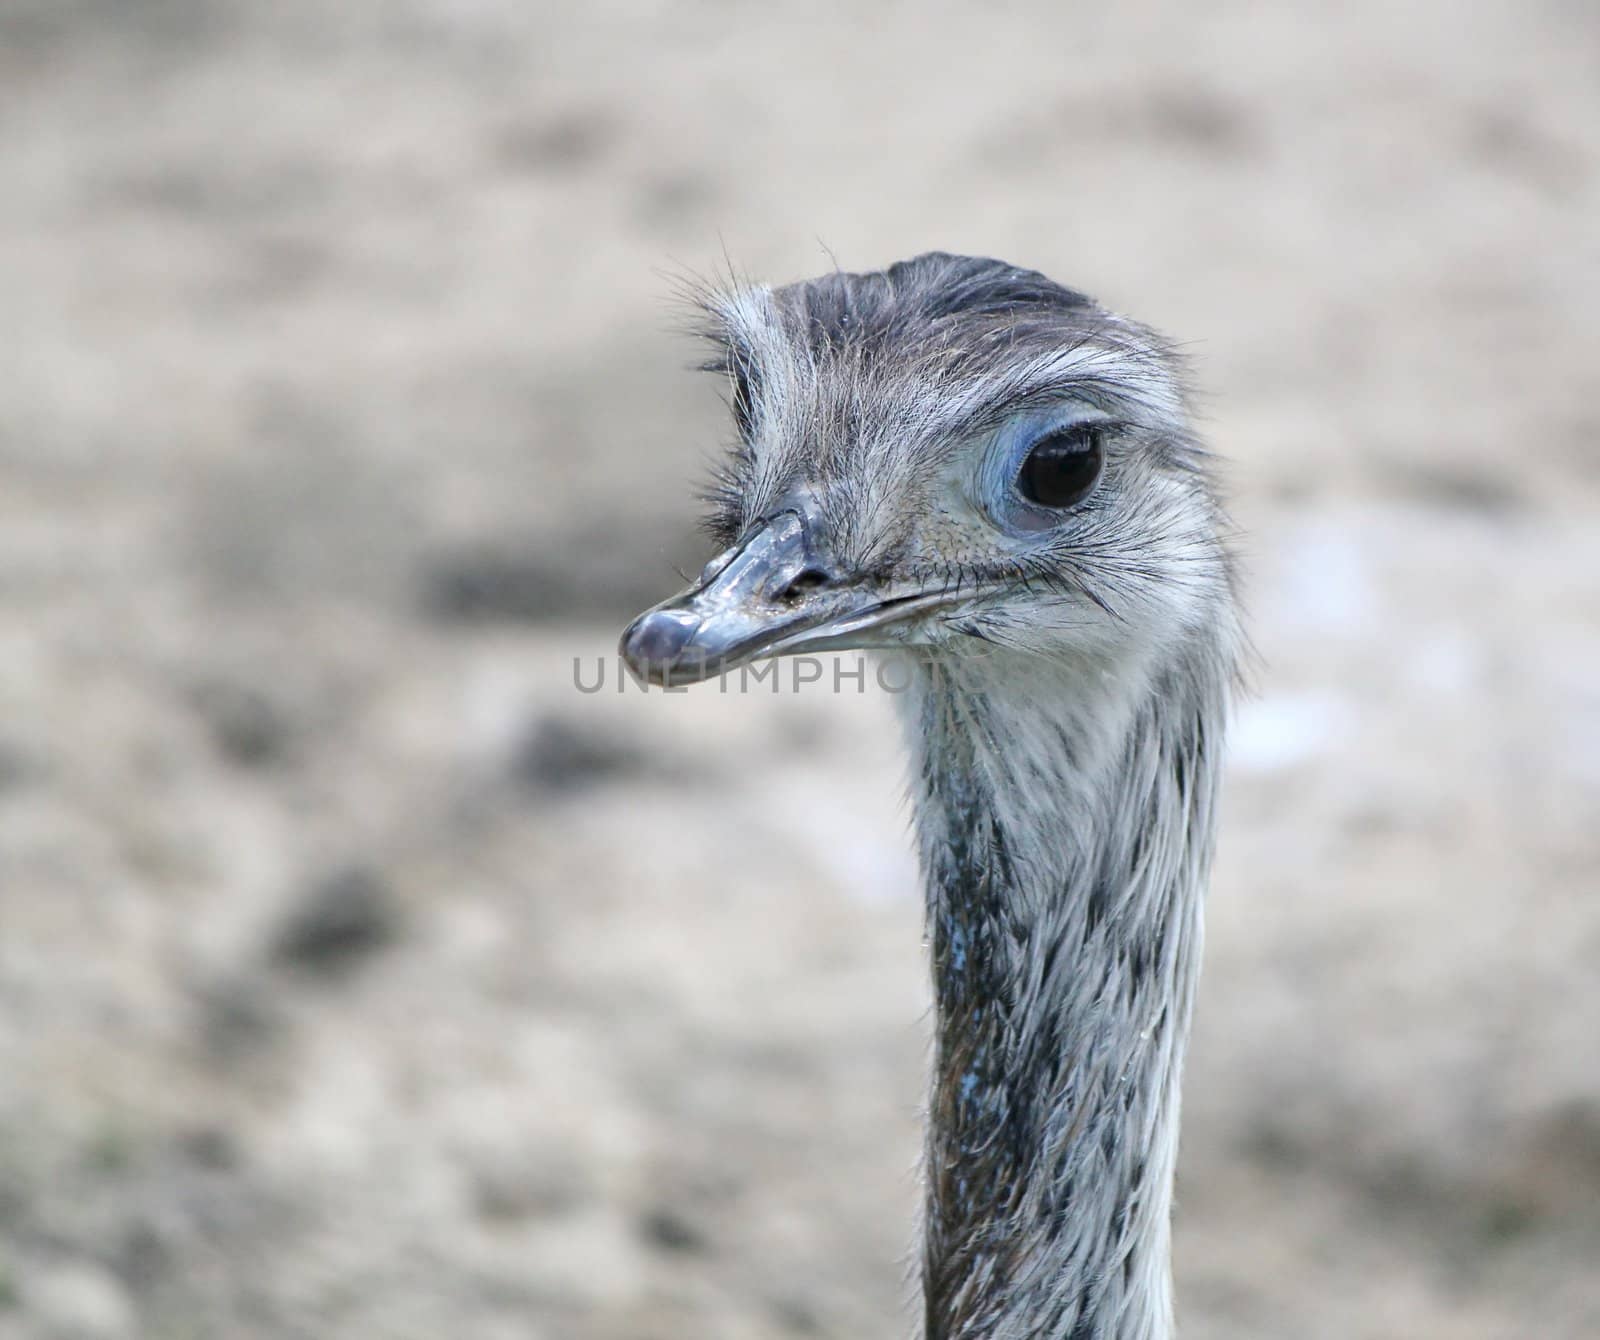 Close up of an emu face in blurry background